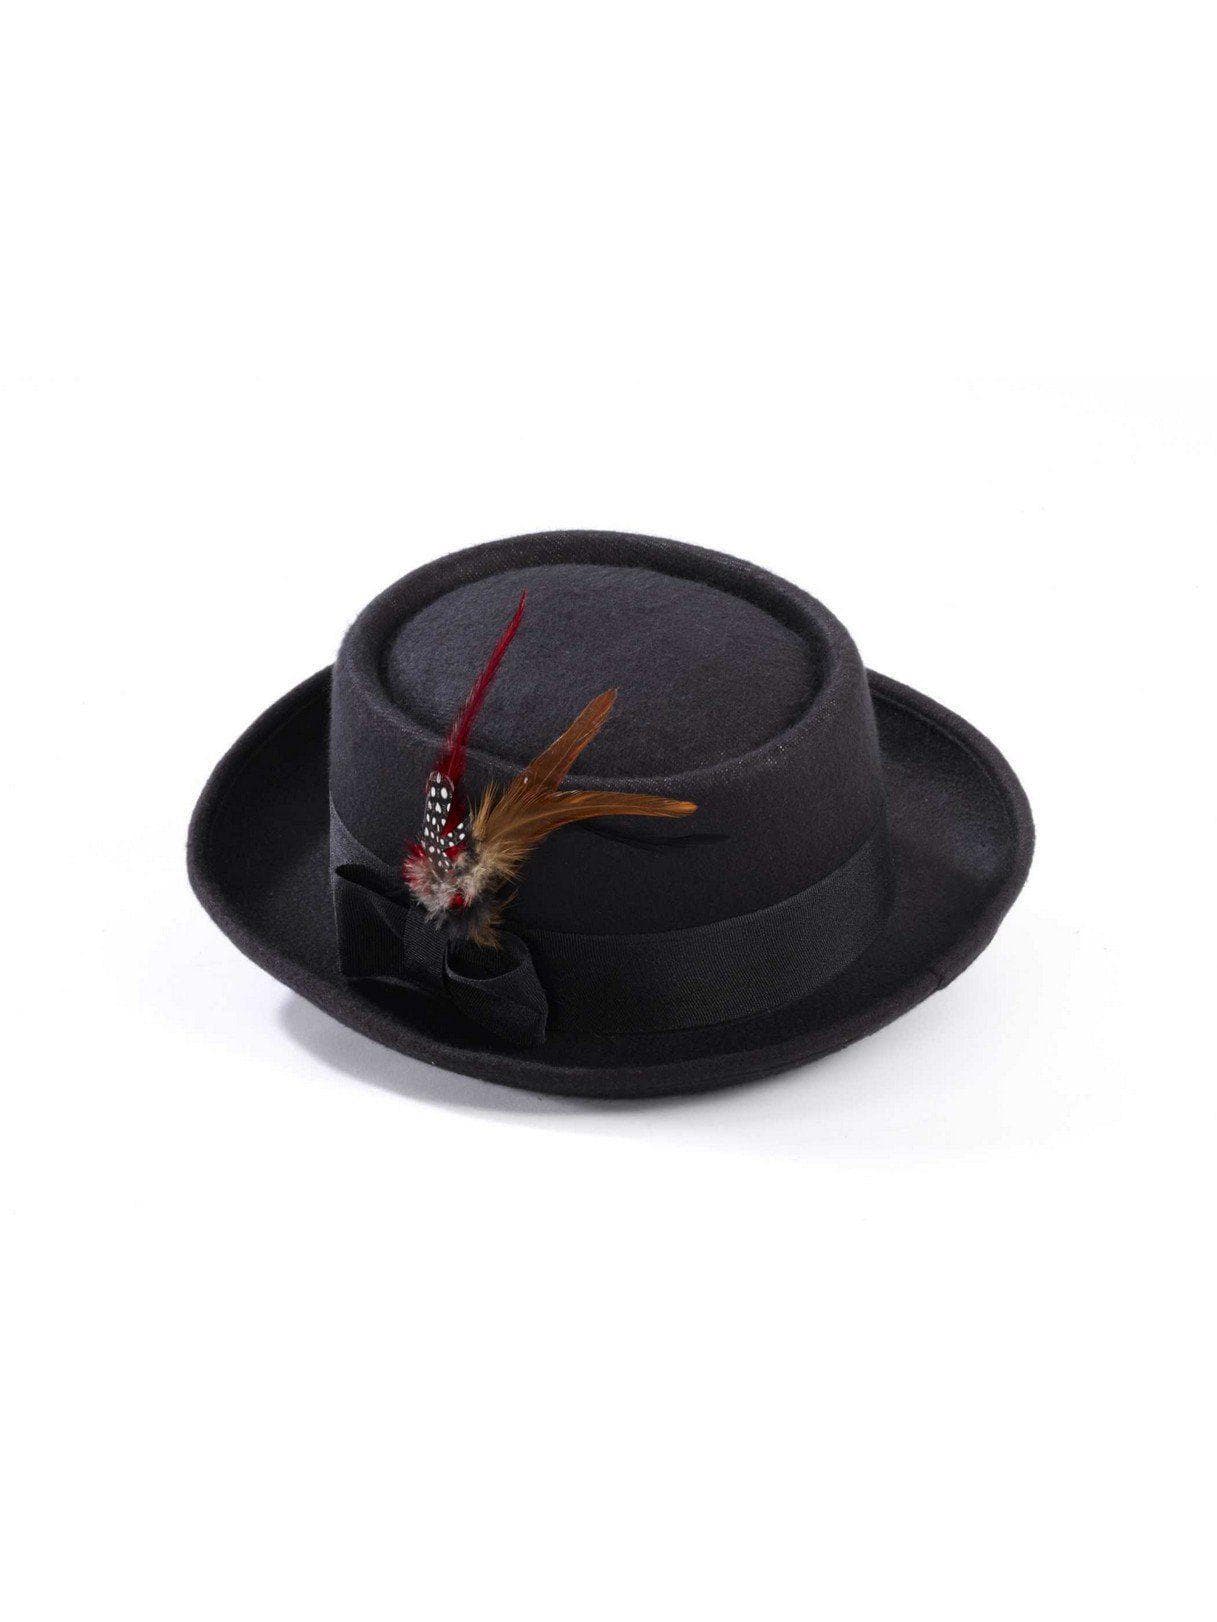 Adult Black Pork Pie Hat with Feather - costumes.com